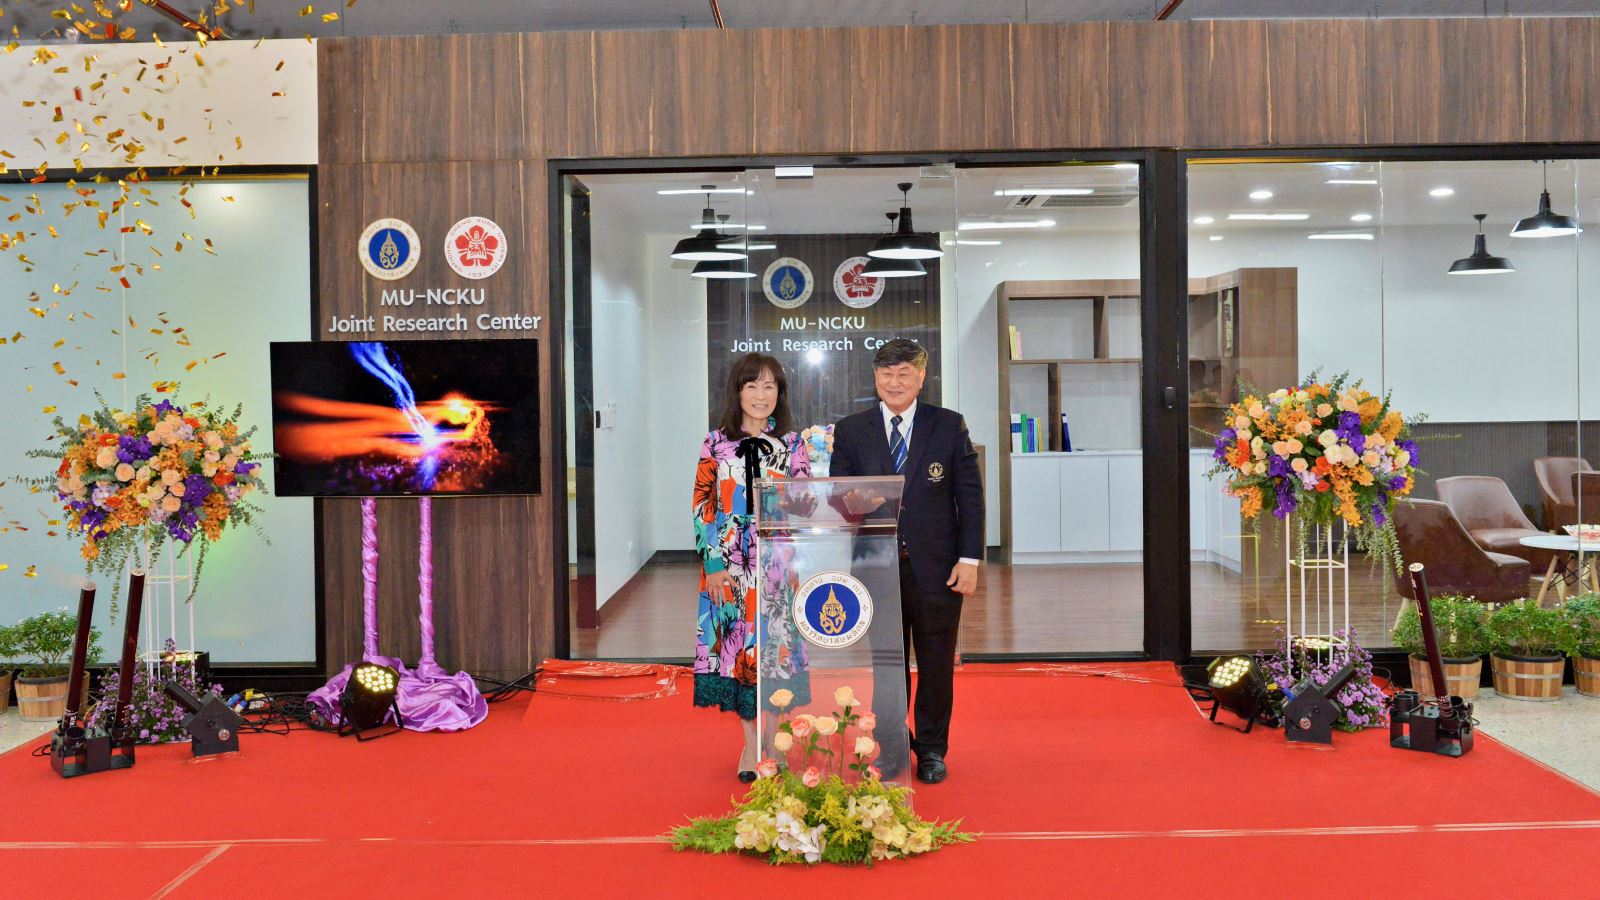 The launch ceremony of MU-NCKU Joint Research Center in 2019